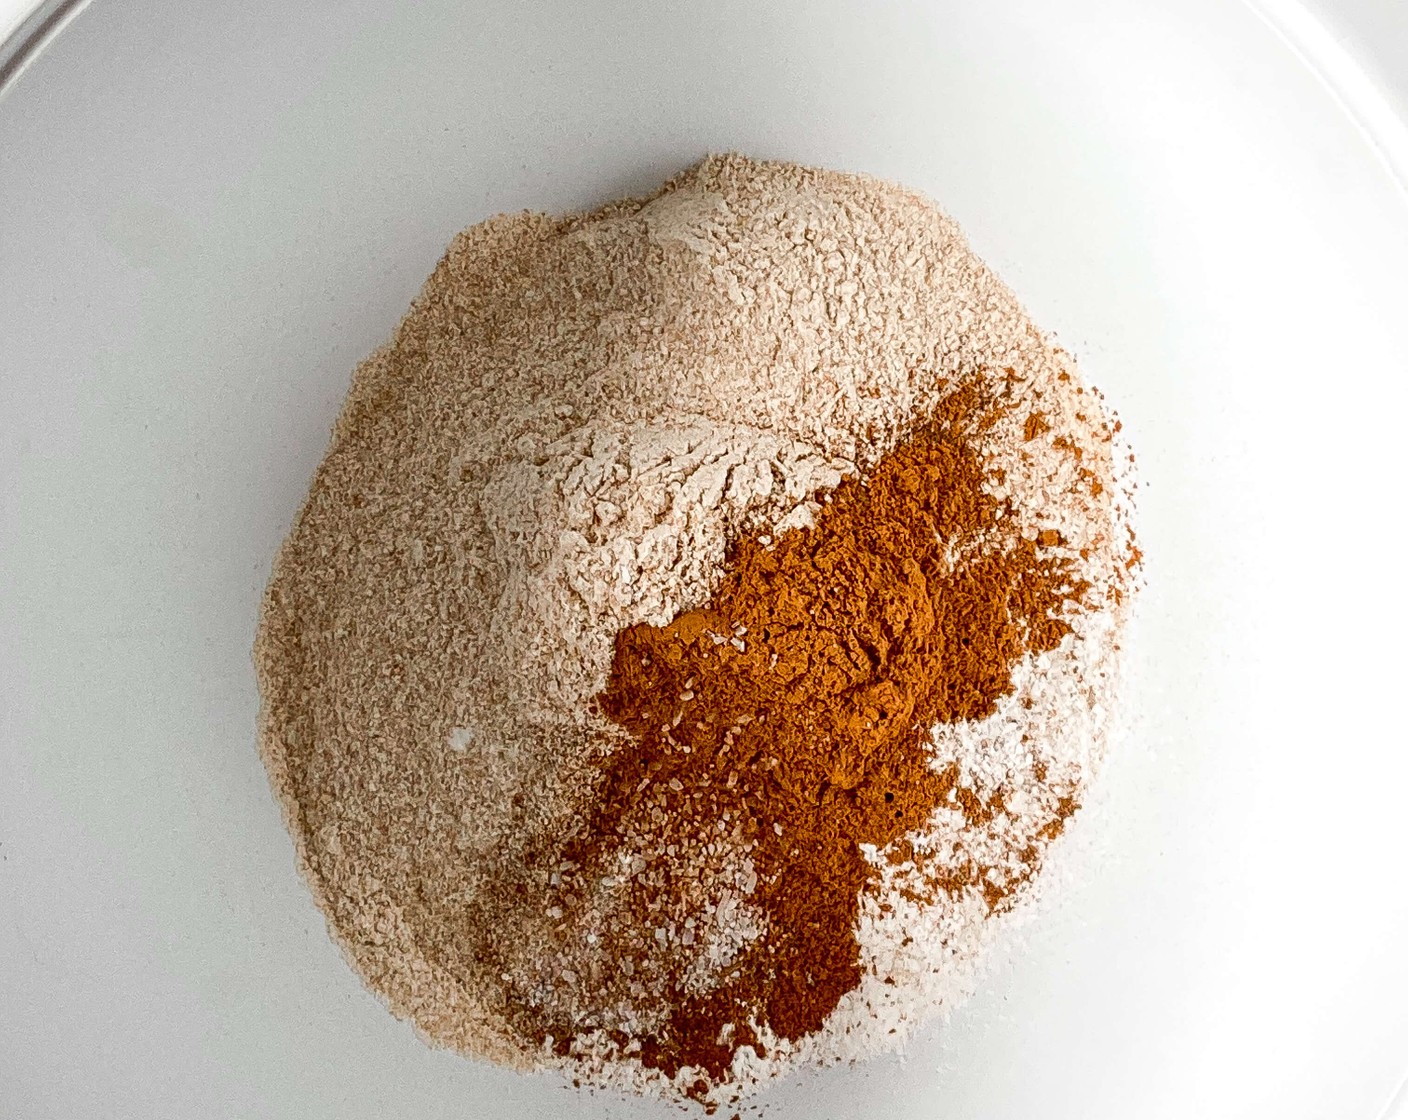 step 2 Combine All-Purpose Flour (1 1/2 cups), Baking Soda (1 tsp), Ground Cinnamon (1 tsp), Ground Nutmeg (1/2 tsp), and Salt (1/2 tsp) in a large bowl and mix until combined.